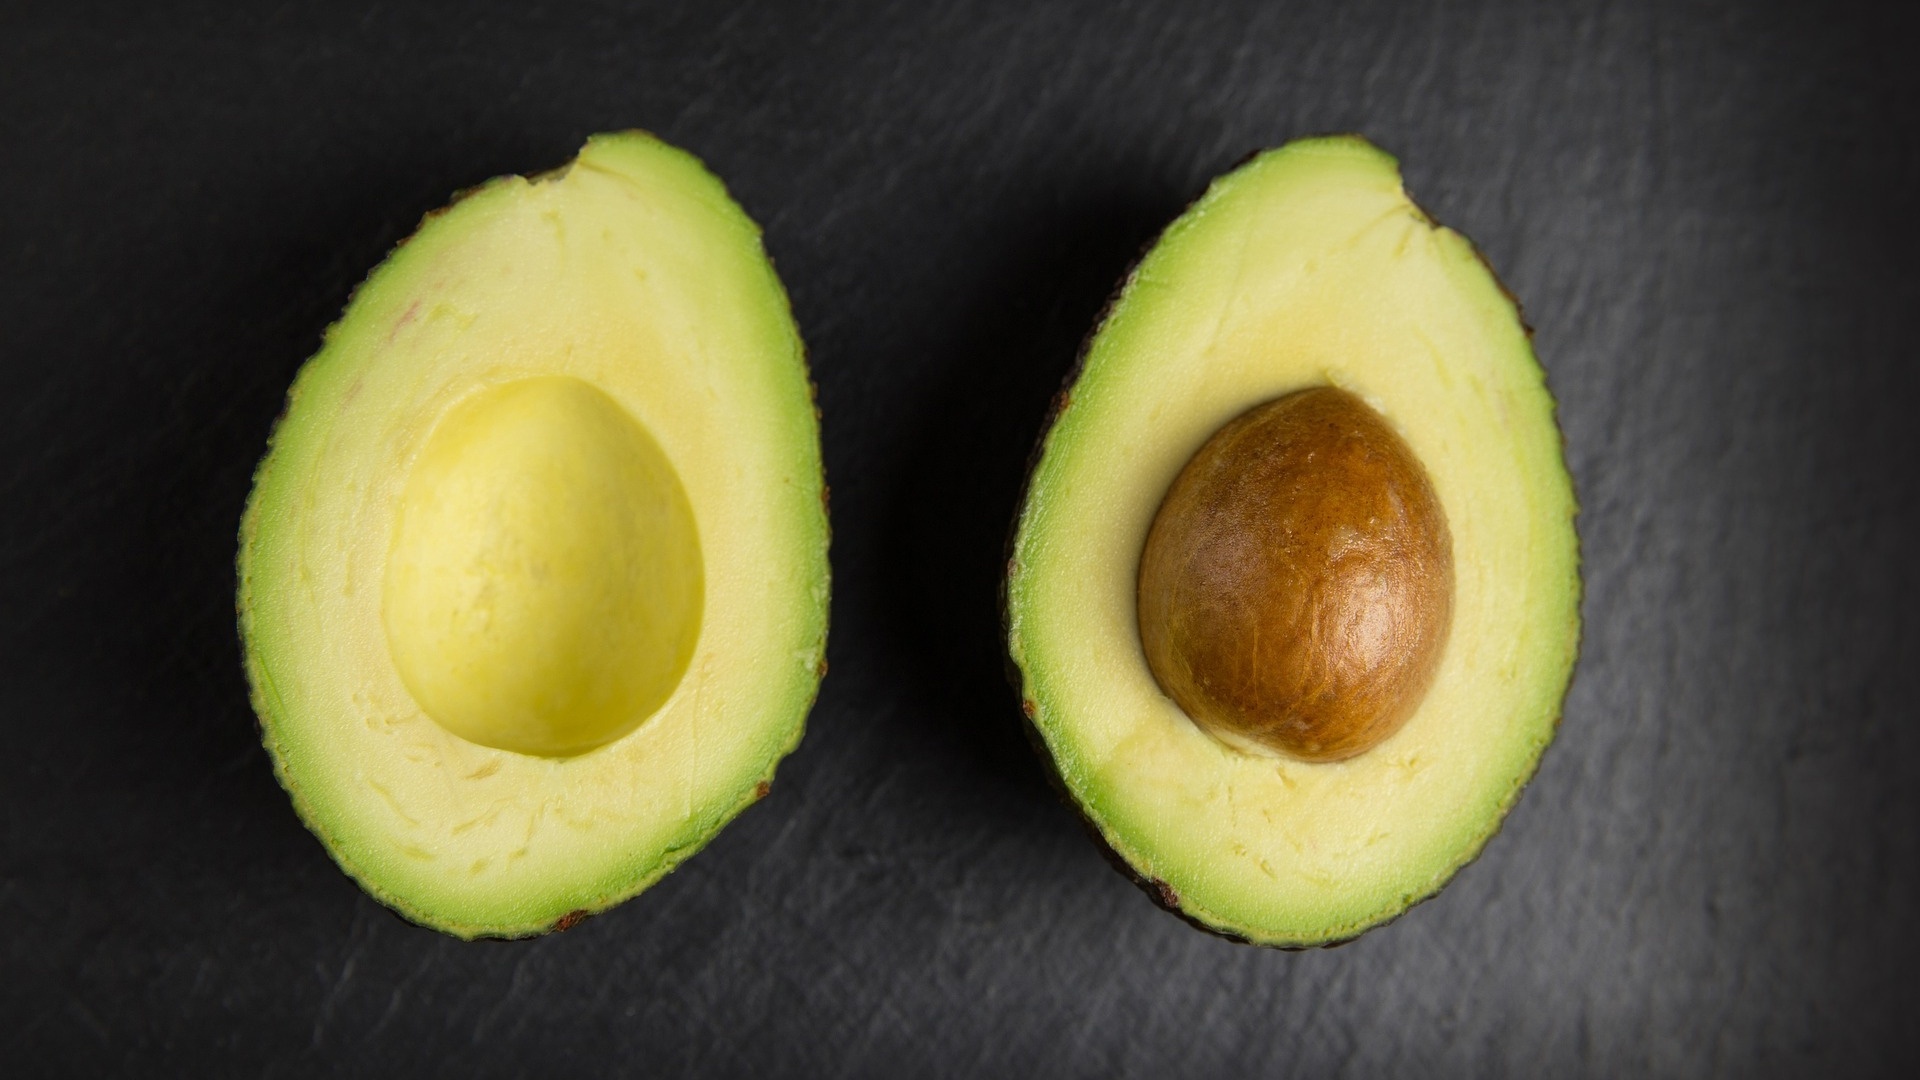 Avocado: Extremely popular in the health and wellness world. 1920x1080 Full HD Wallpaper.